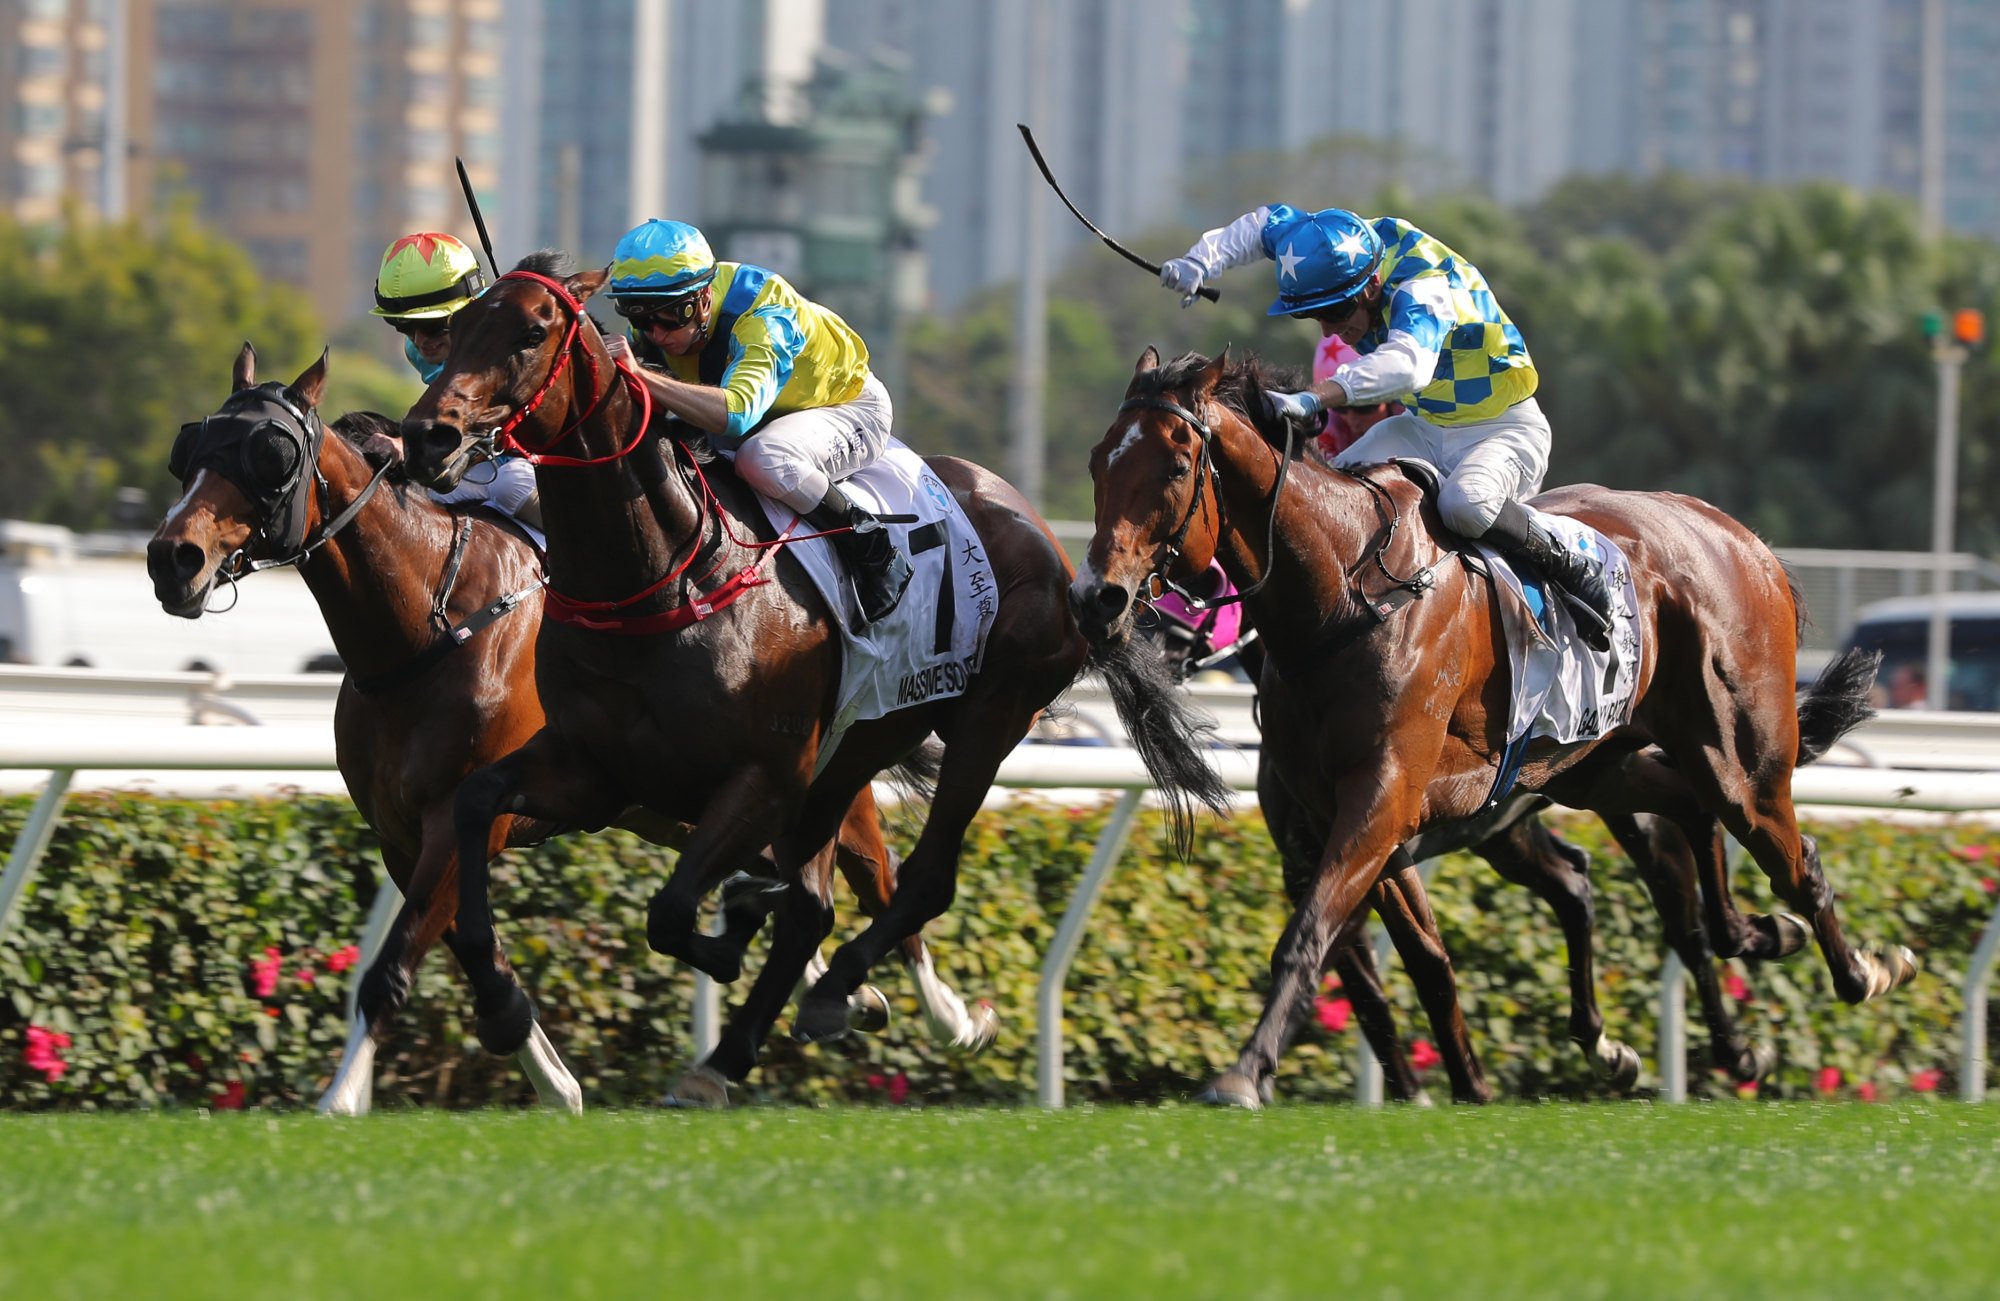 Massive Sovereign (centre) beats Galaxy Patch (outside) and Ka Ying Generation in the Hong Kong Derby.